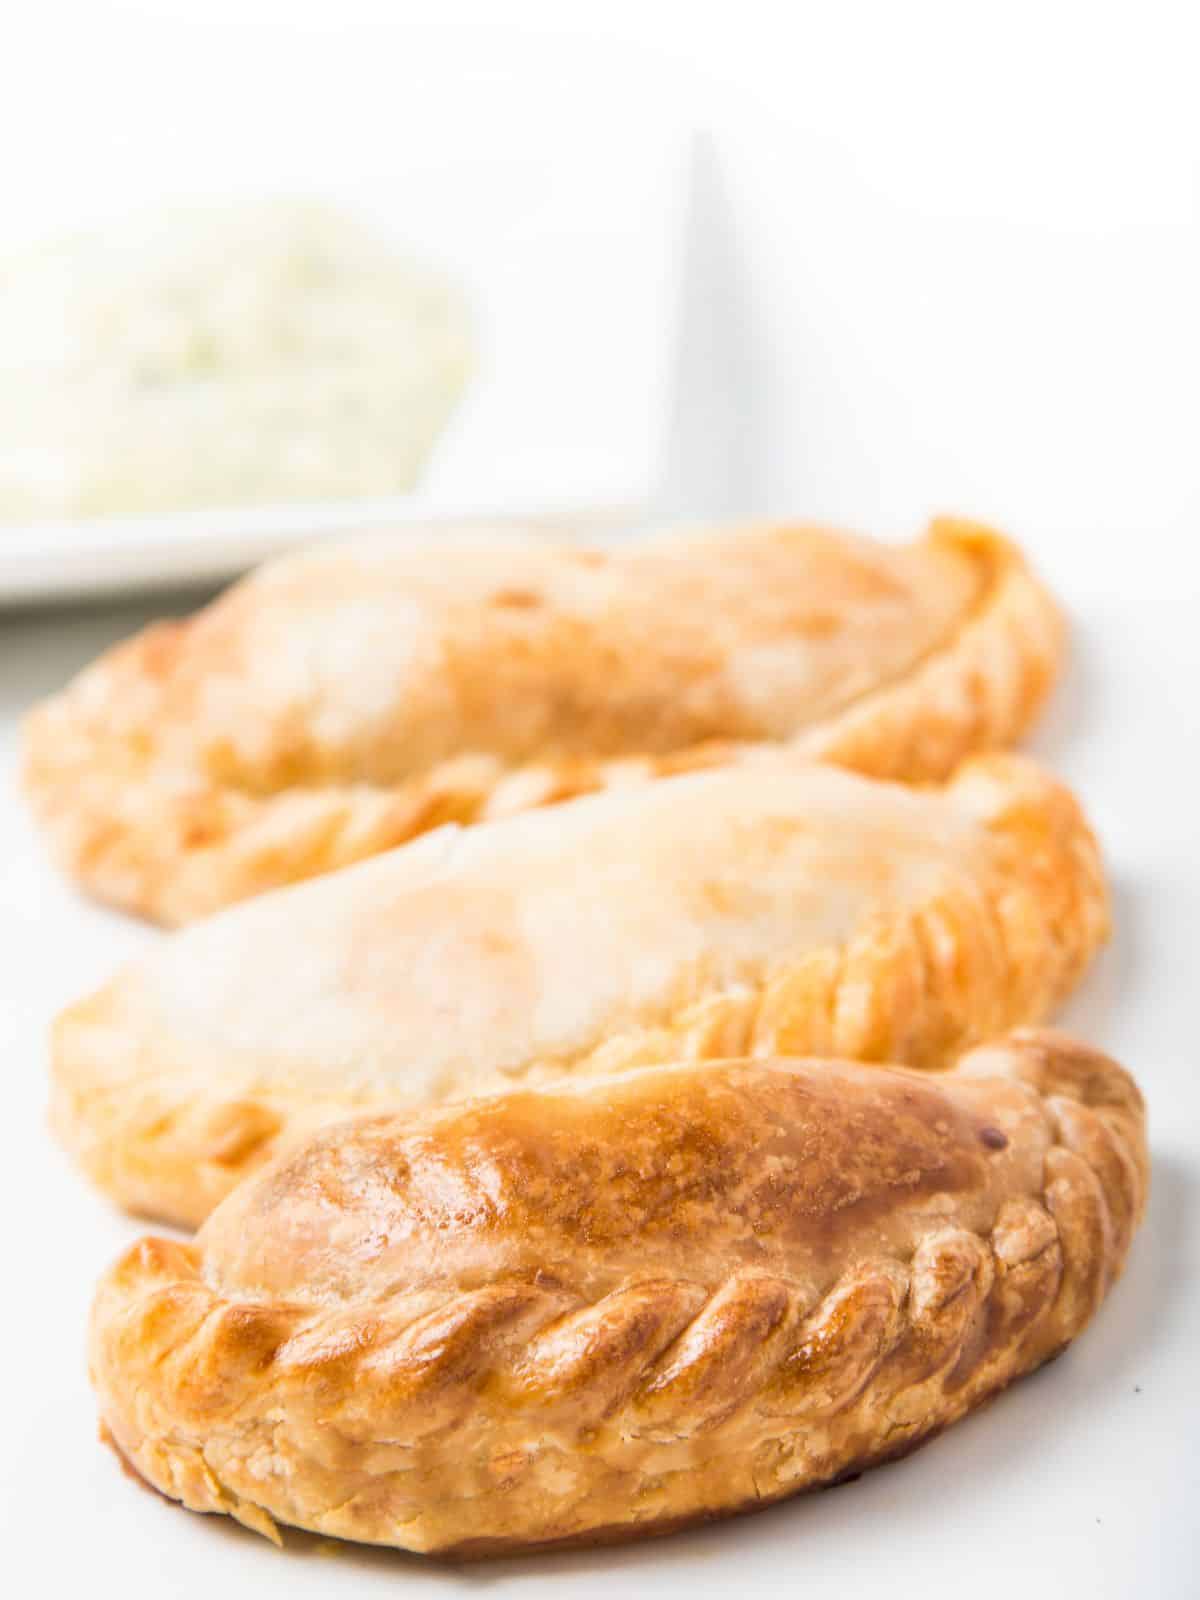 17 Easy Ideas for What to Serve With Empanadas